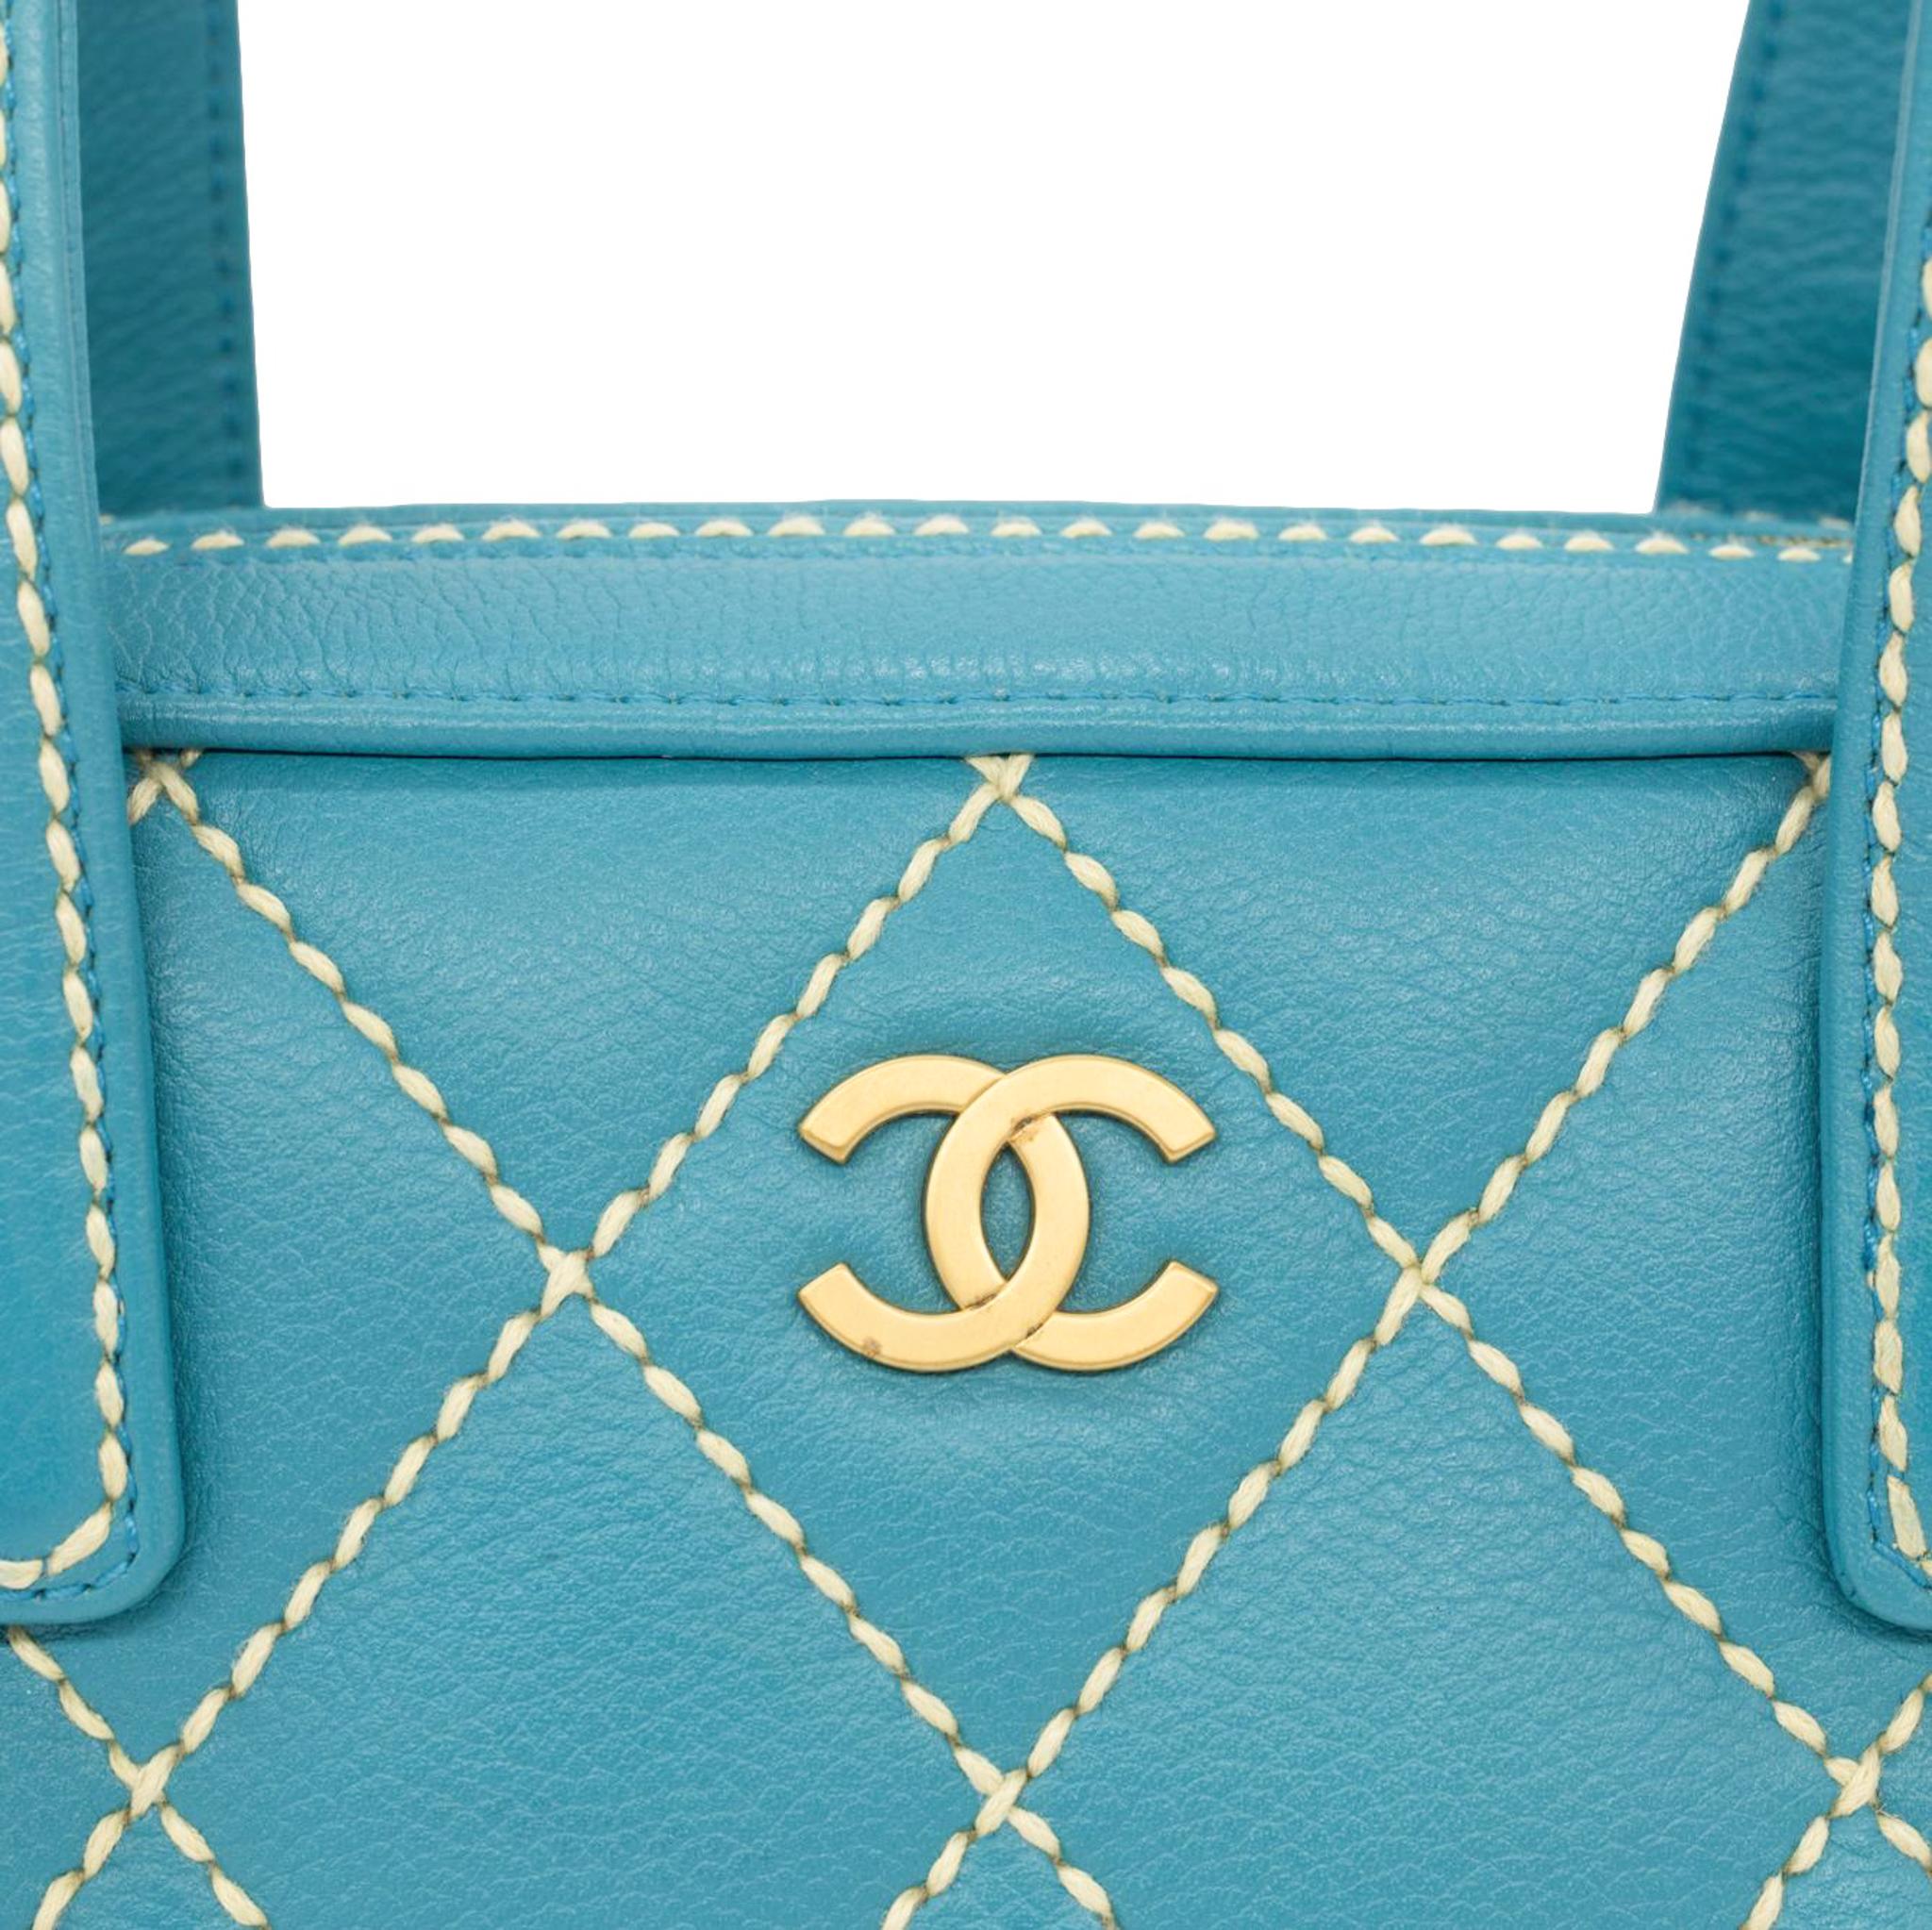 Chanel Blue Caviar Calfskin Leather Wild Stitch Surpique Bowler Top Handle Bag, 2004. This highly coveted and rare collectible surpique bowler was produced between 2003 - 2004, baring a serial code of 